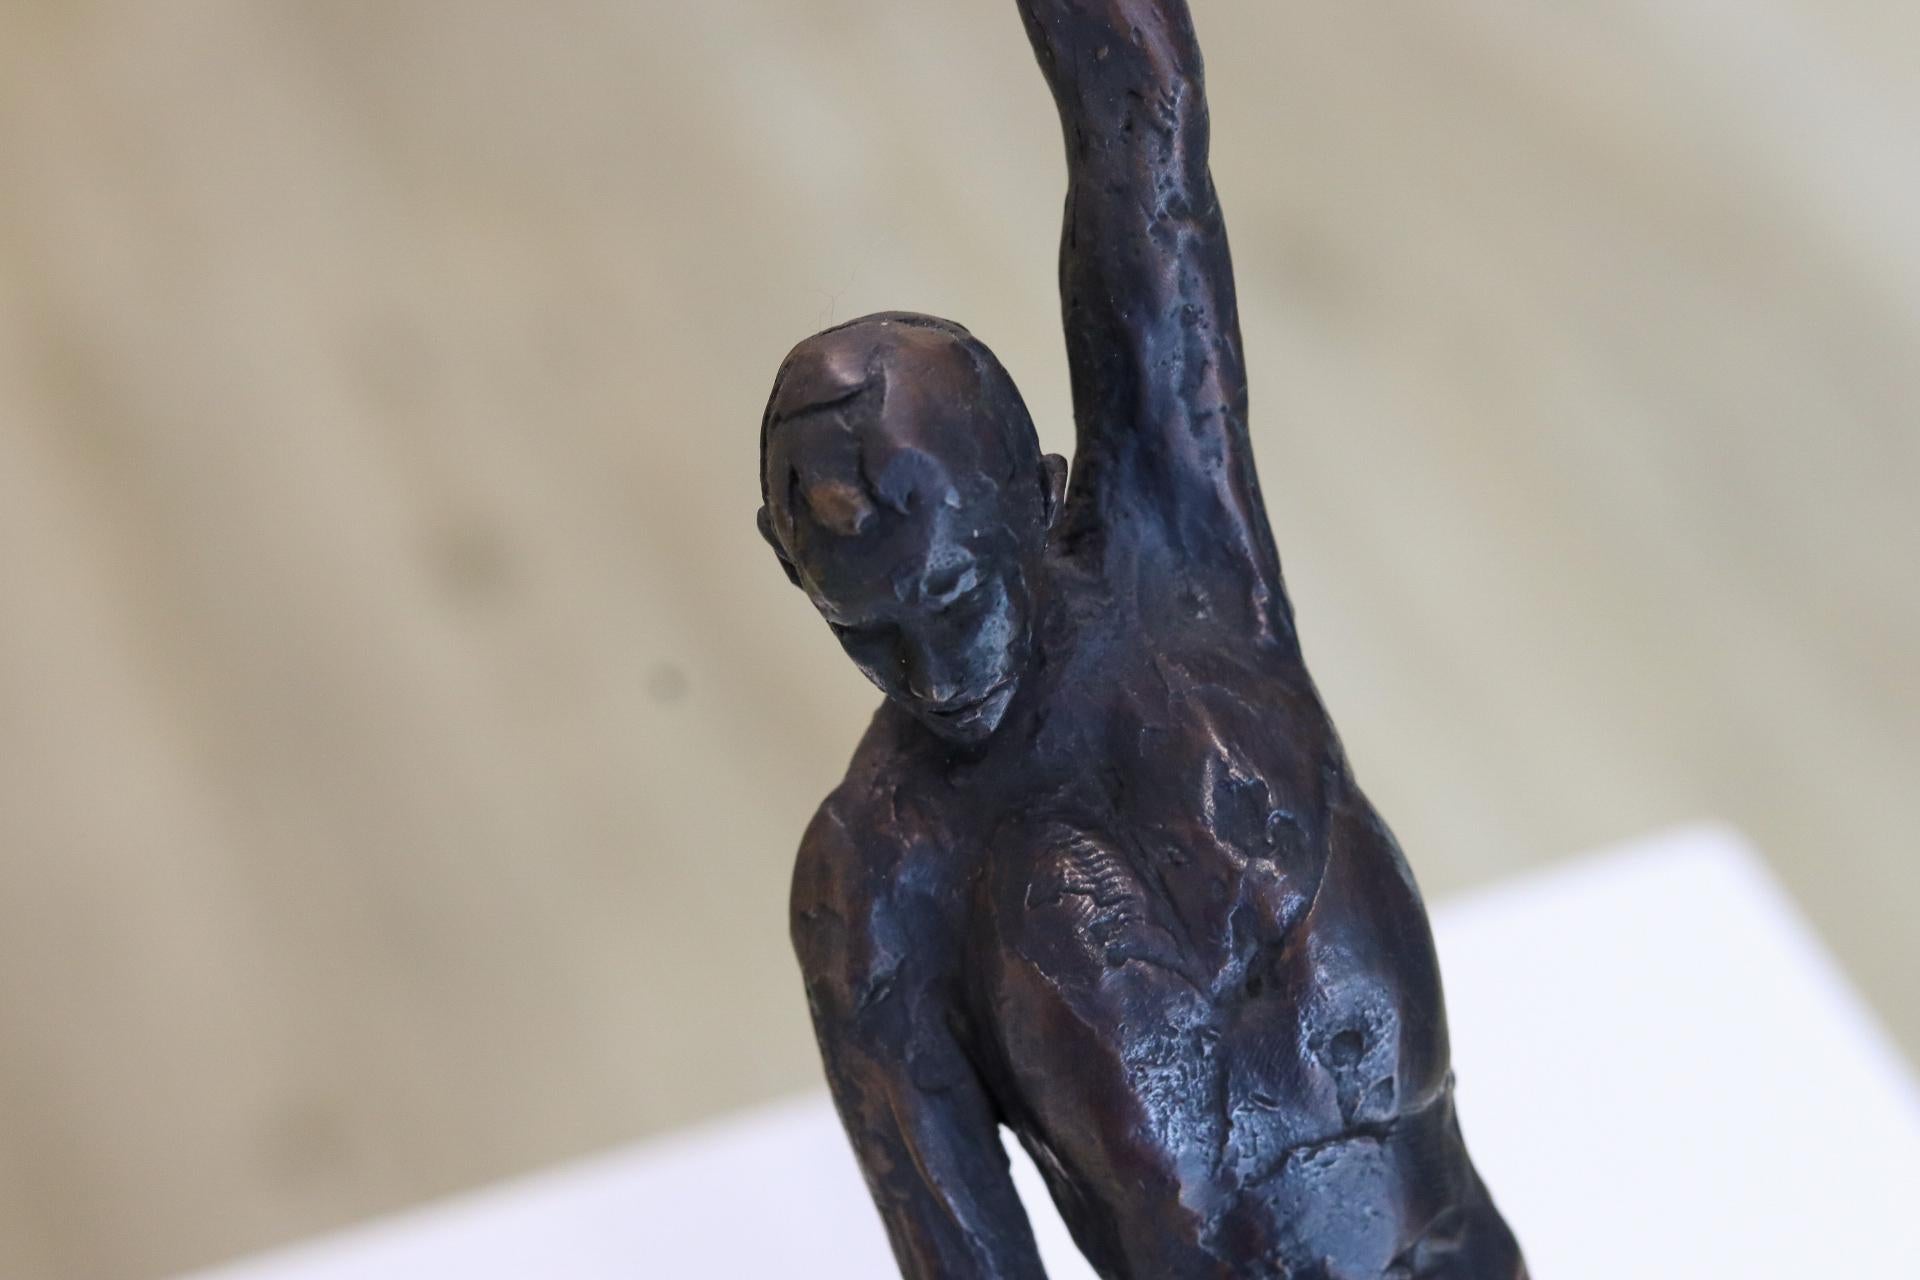 Male Nudity - 21st Century Contemporary Bronze Sculpture of a Nude Man Standing - Gold Figurative Sculpture by Romee Kanis